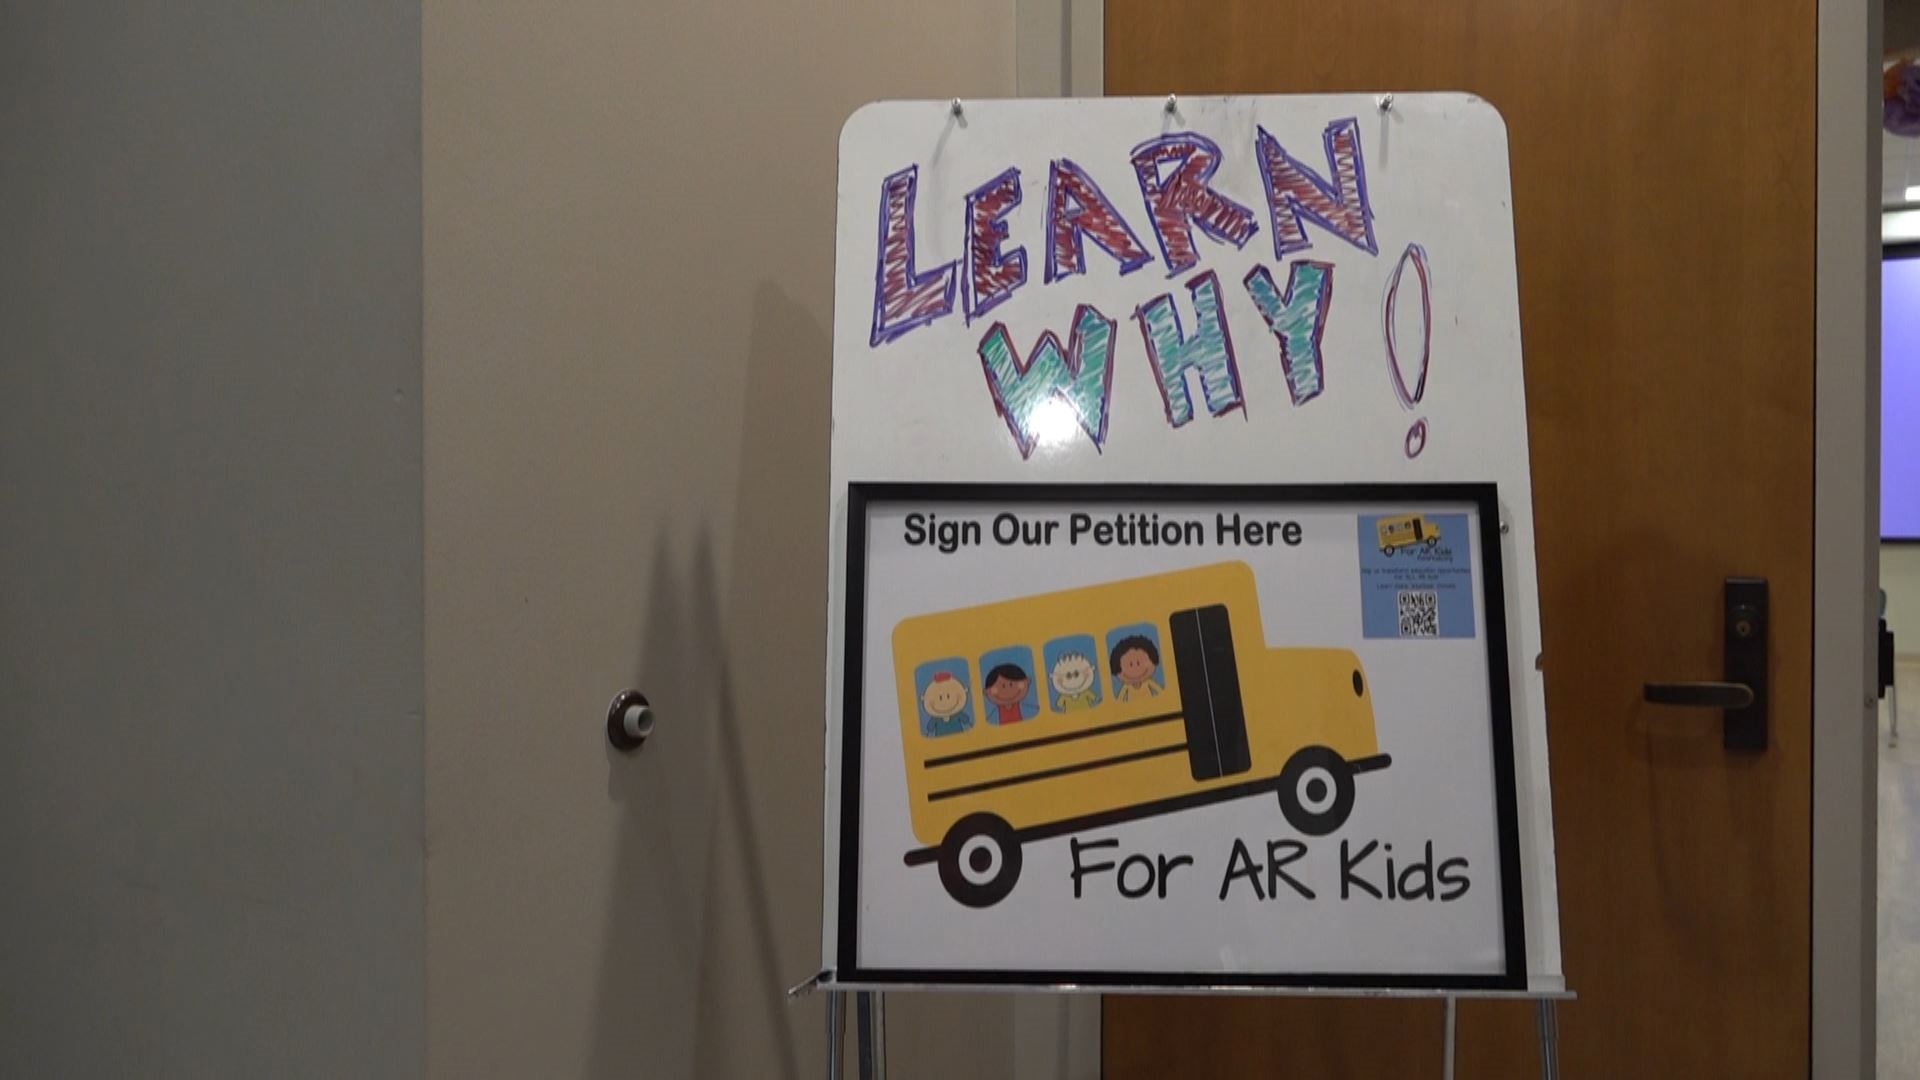 AN ORGANIZATION CALLED "FOR AR KIDS" VISITED ROGERS TODAY AS THEY PUSH TO GET ARKANSAS EDUCATIONAL STANDARDS UPDATED AND CHANGED IN THE STATE CONSTITUTION...